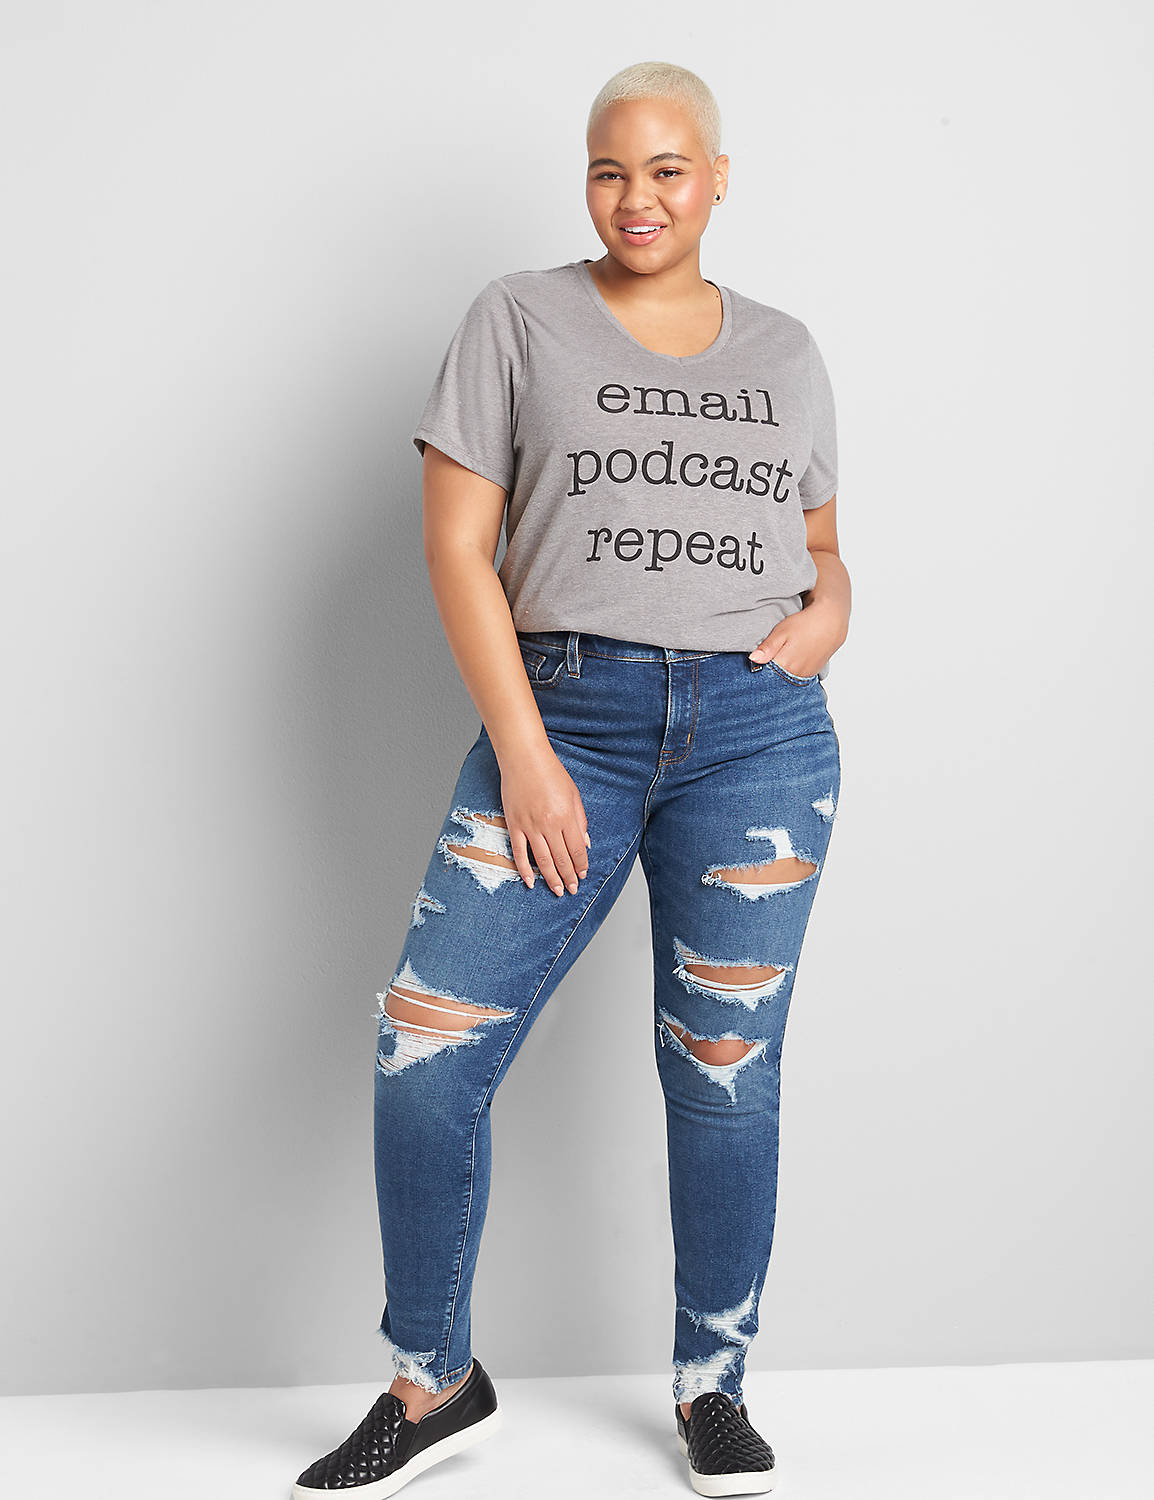 Email Podcast Repeat Graphic Tee Product Image 3